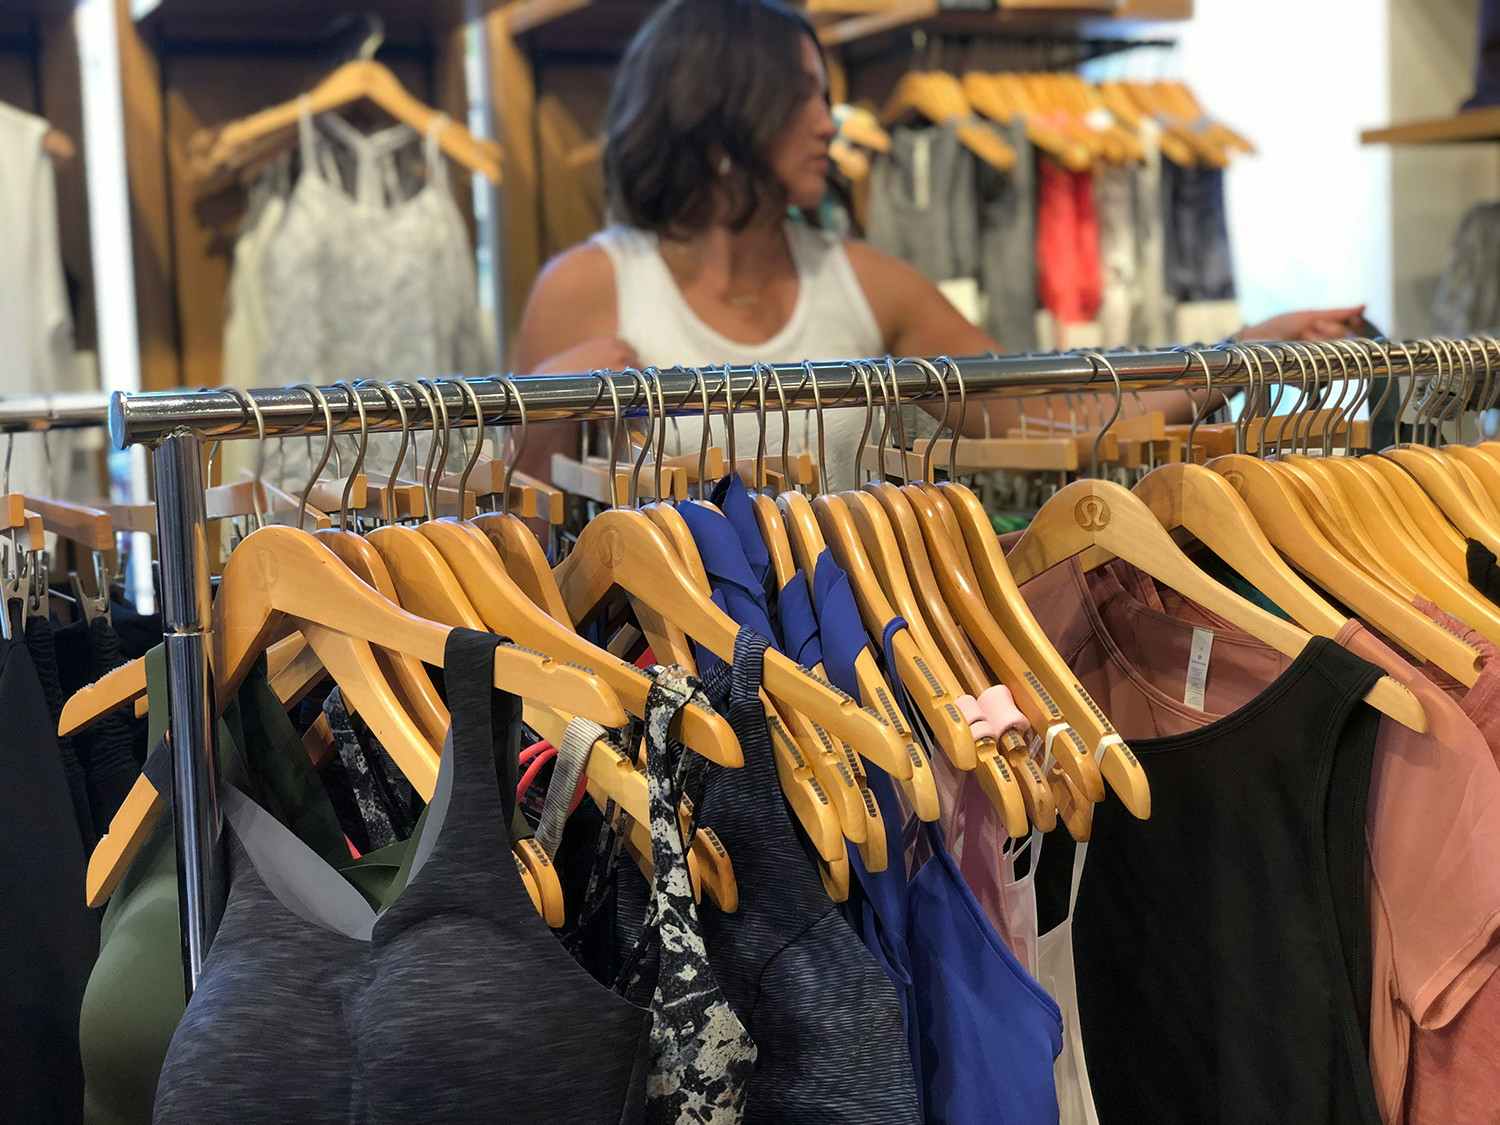 Woman looking through We Made Too Much racks inside the store